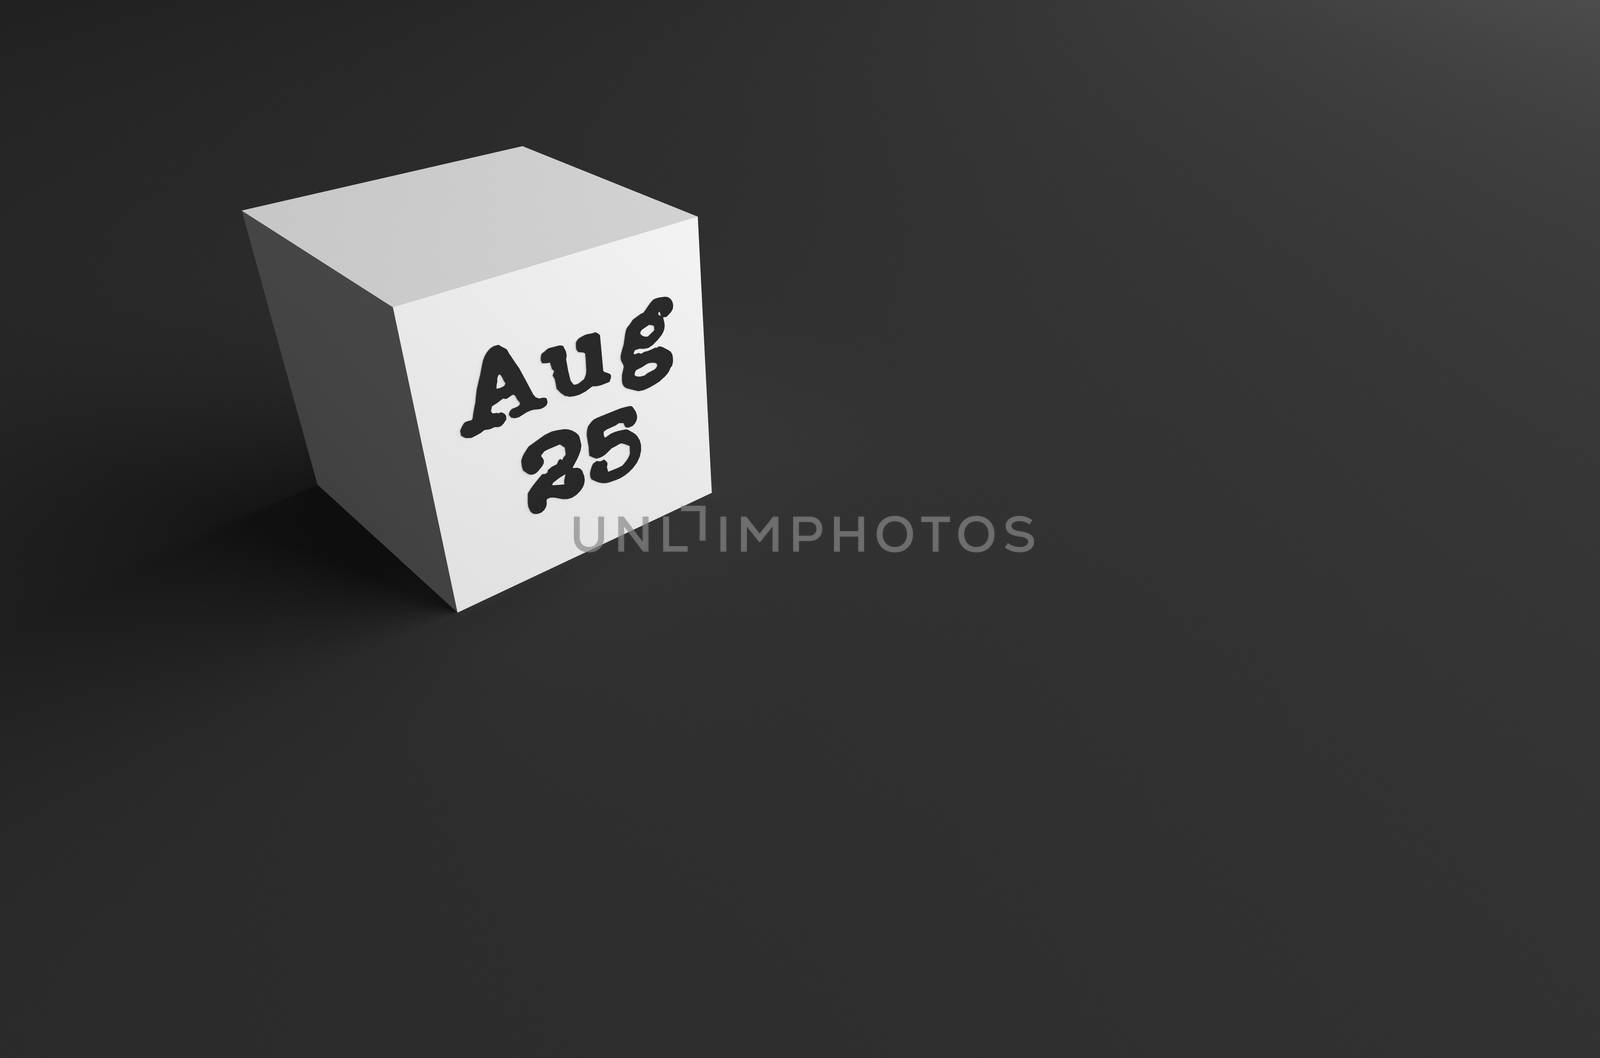 3D RENDERING OF Aug (ABBREVIATION OF AUGUST) 25 ON WHITE CUBE